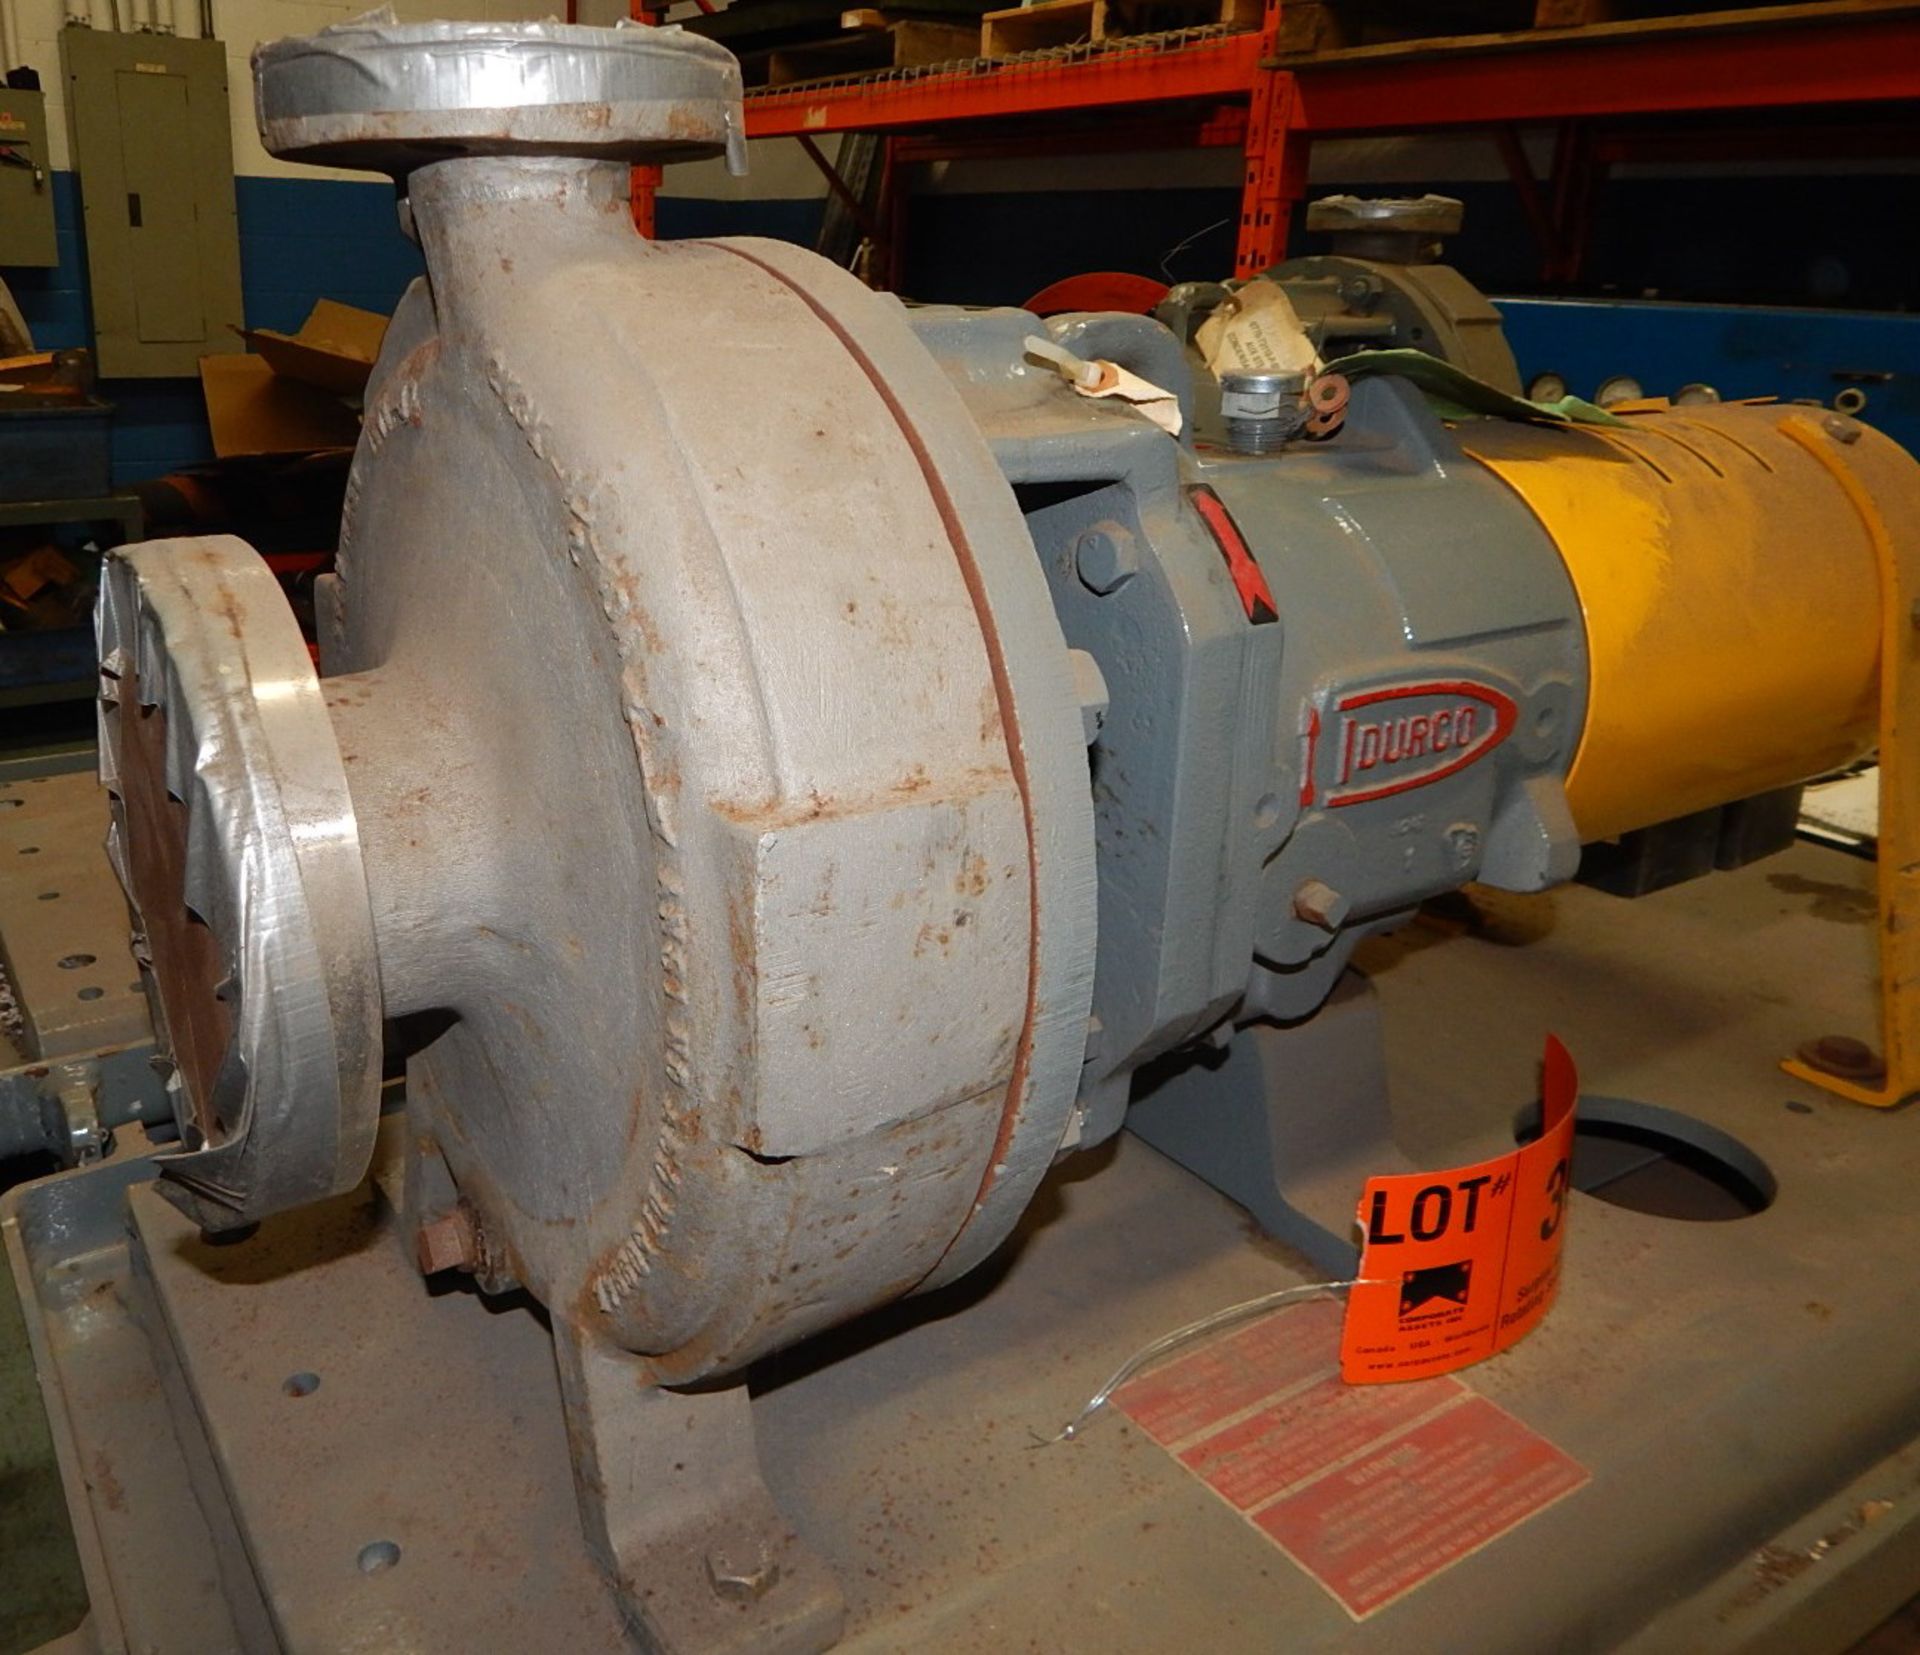 FLOWSERVE 2K3X1.5-10ARV CENTRIFUGAL PUMP WITH 1700 RPM, 70 USGMP, S/N: B030232-16 (CI) [RIGGING - Image 2 of 4